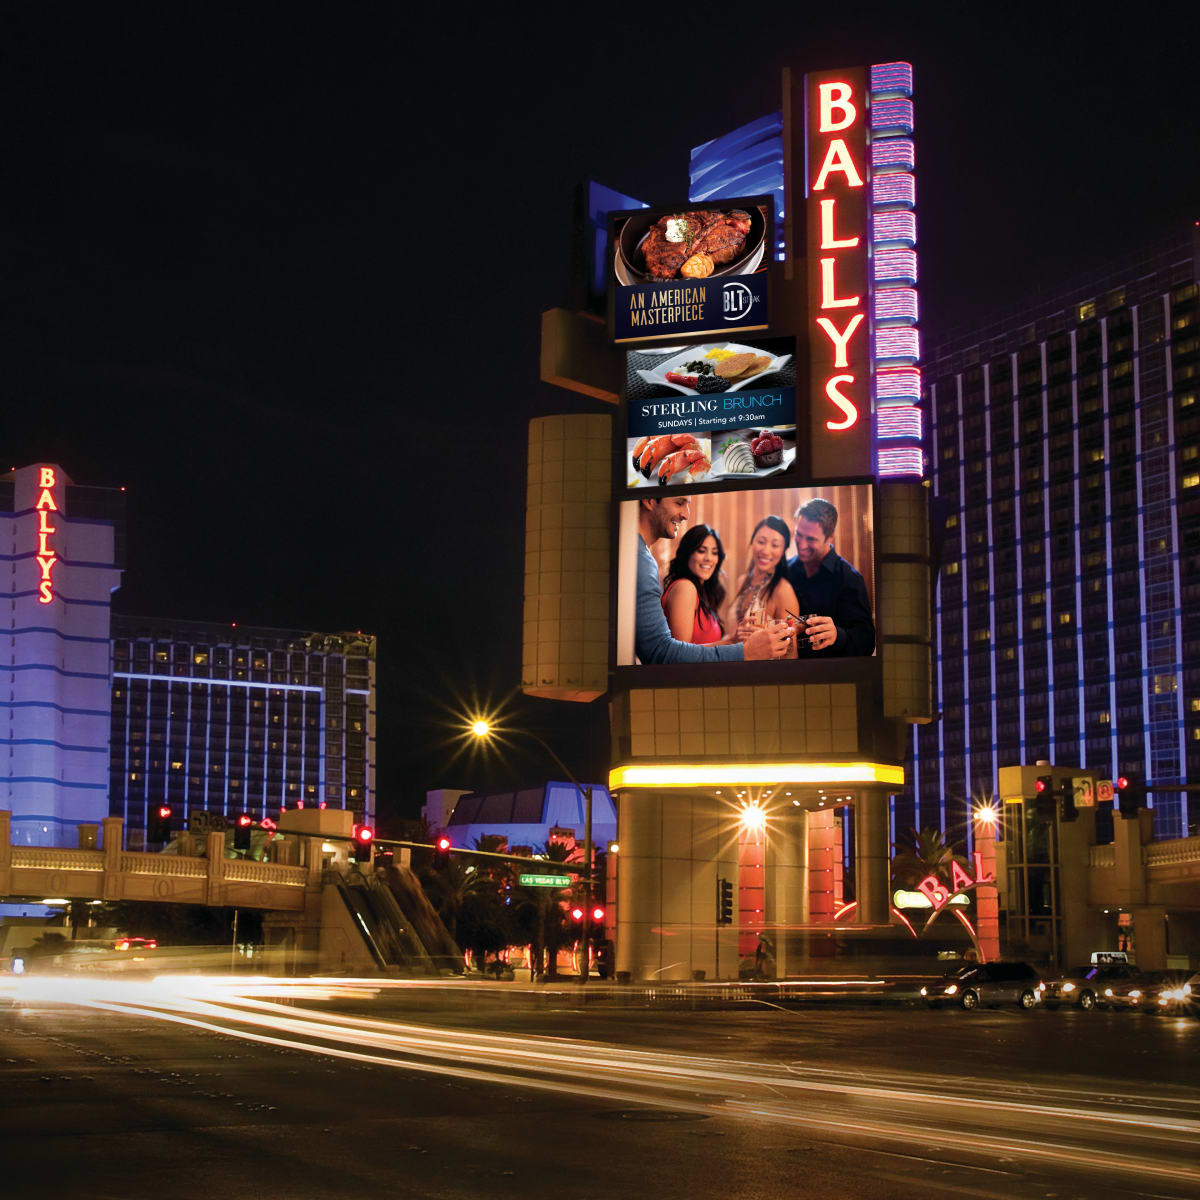 Changes in the Cards for Iconic Las Vegas Strip After Big Hotel